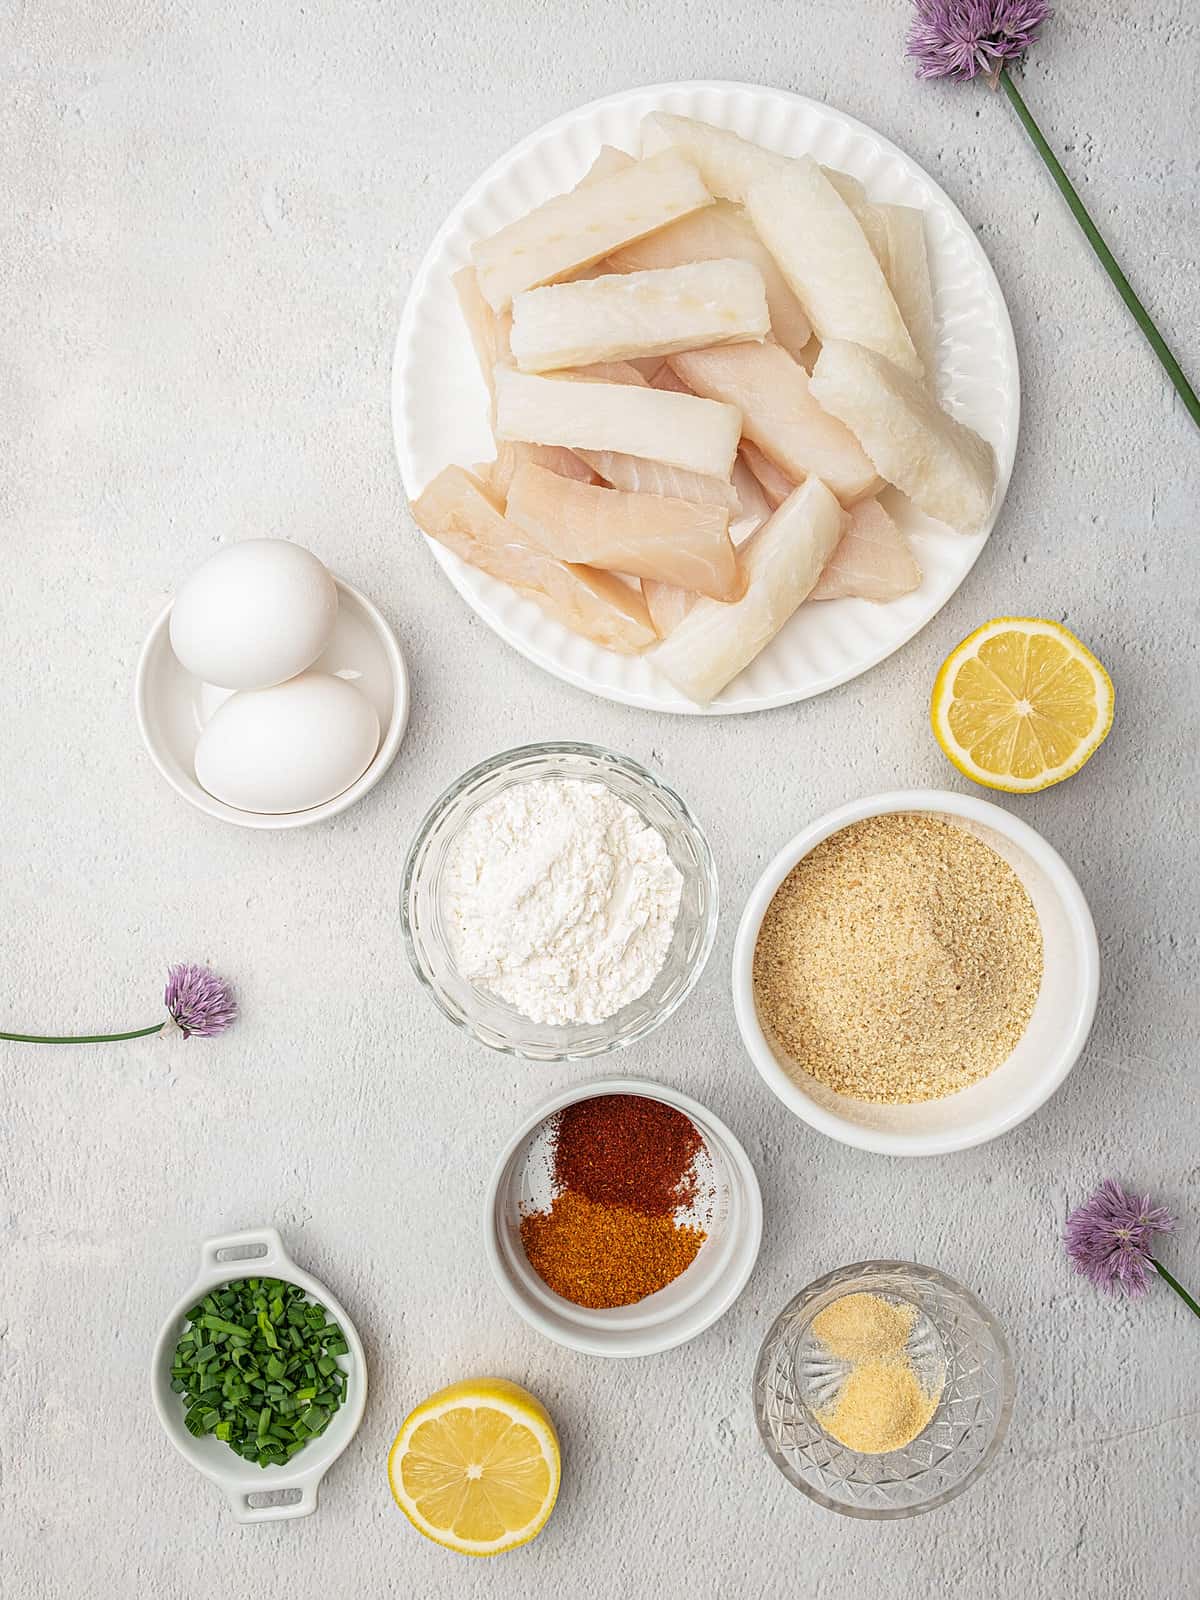 Overhead view of ingredients for air fryer fish sticks